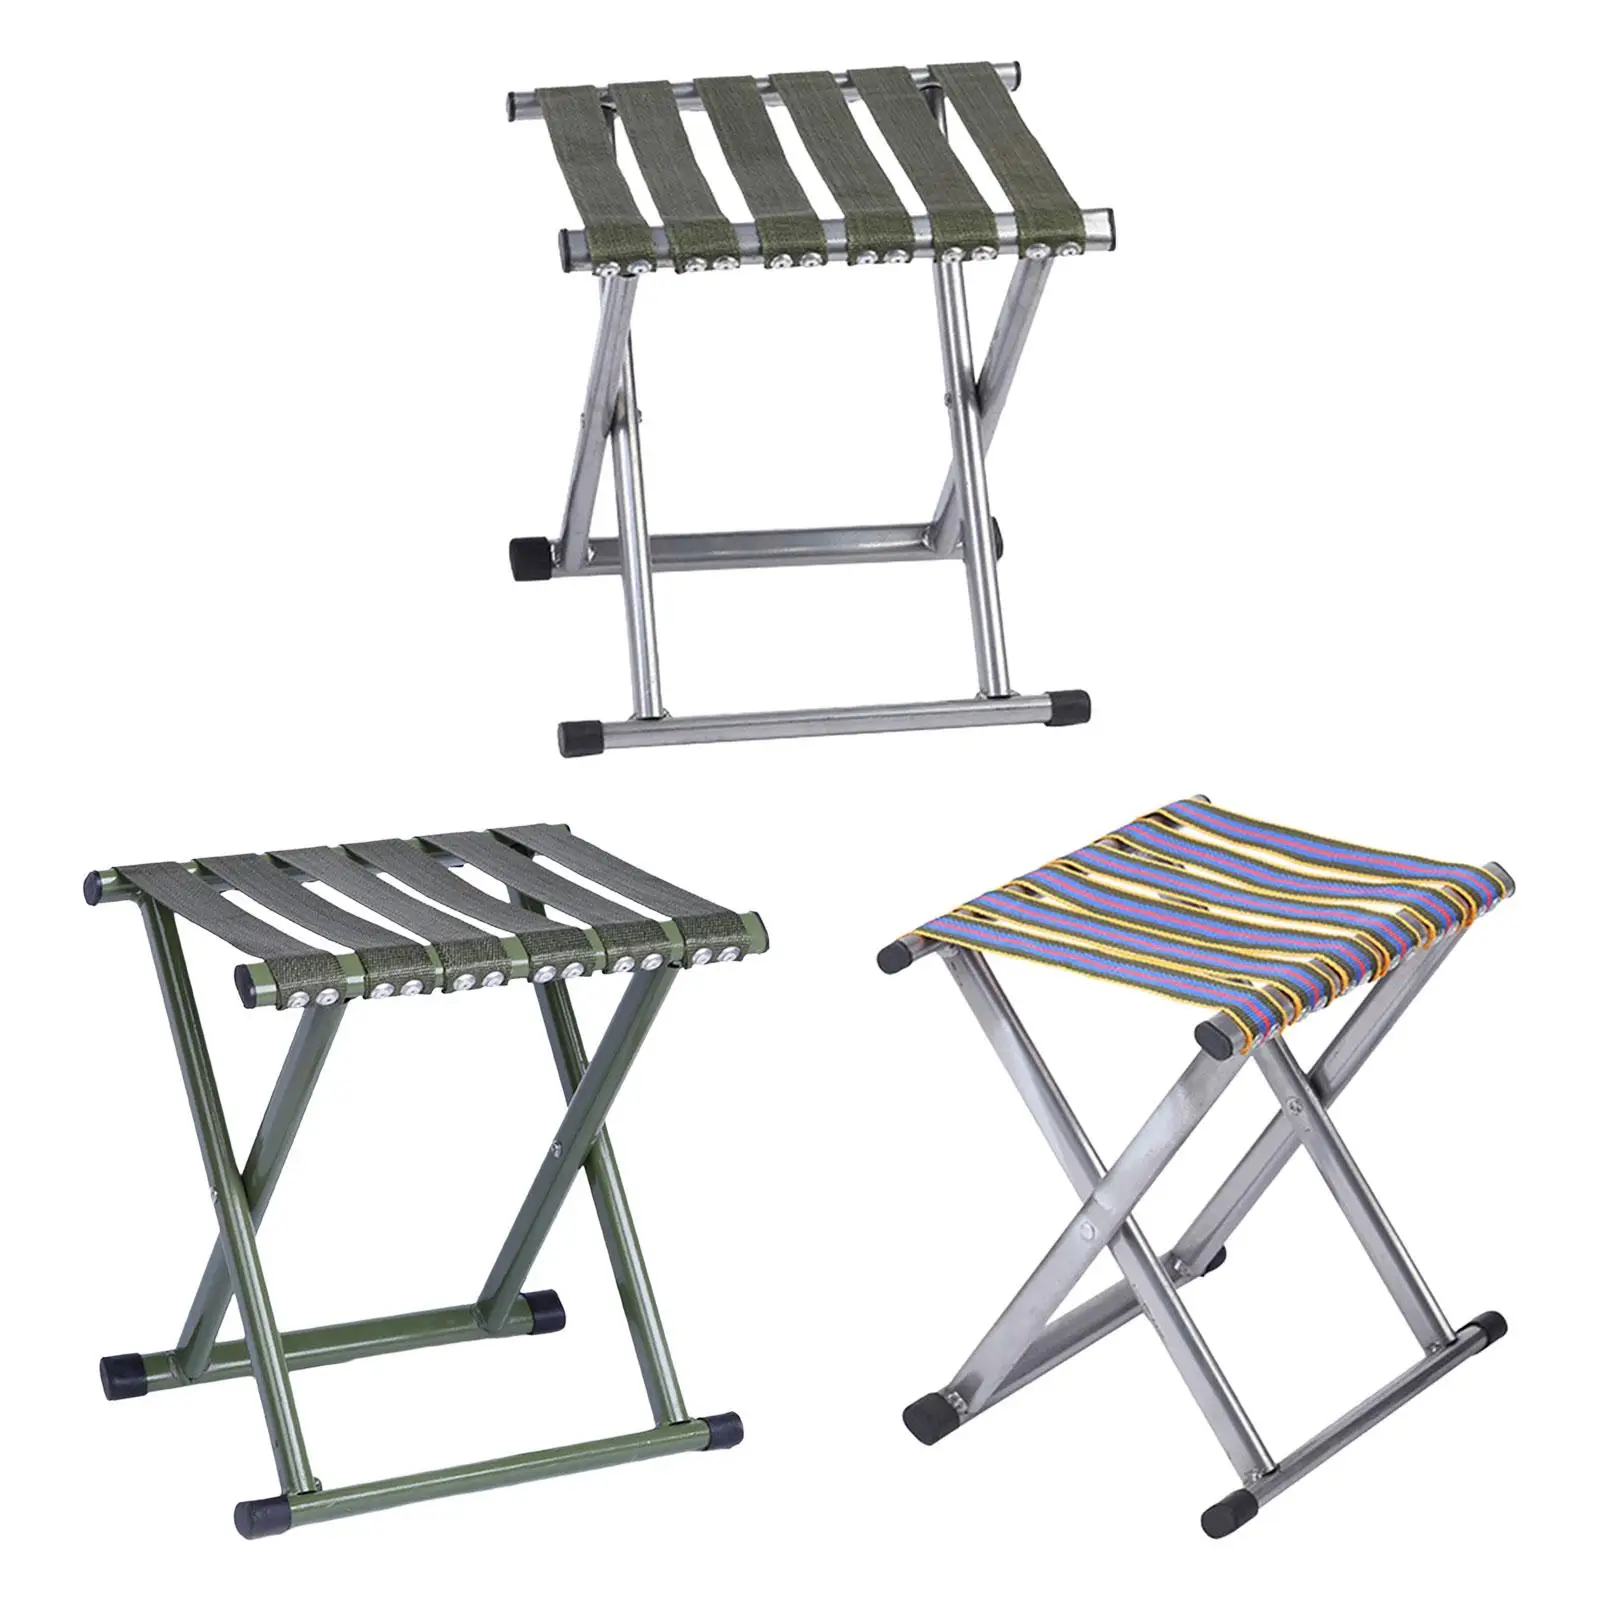 Camping Folding Stool Foot Stool Foot Rest Footrest Compact Collapsible Stool Fishing Chair for Beach BBQ Patio Barbecue Travel